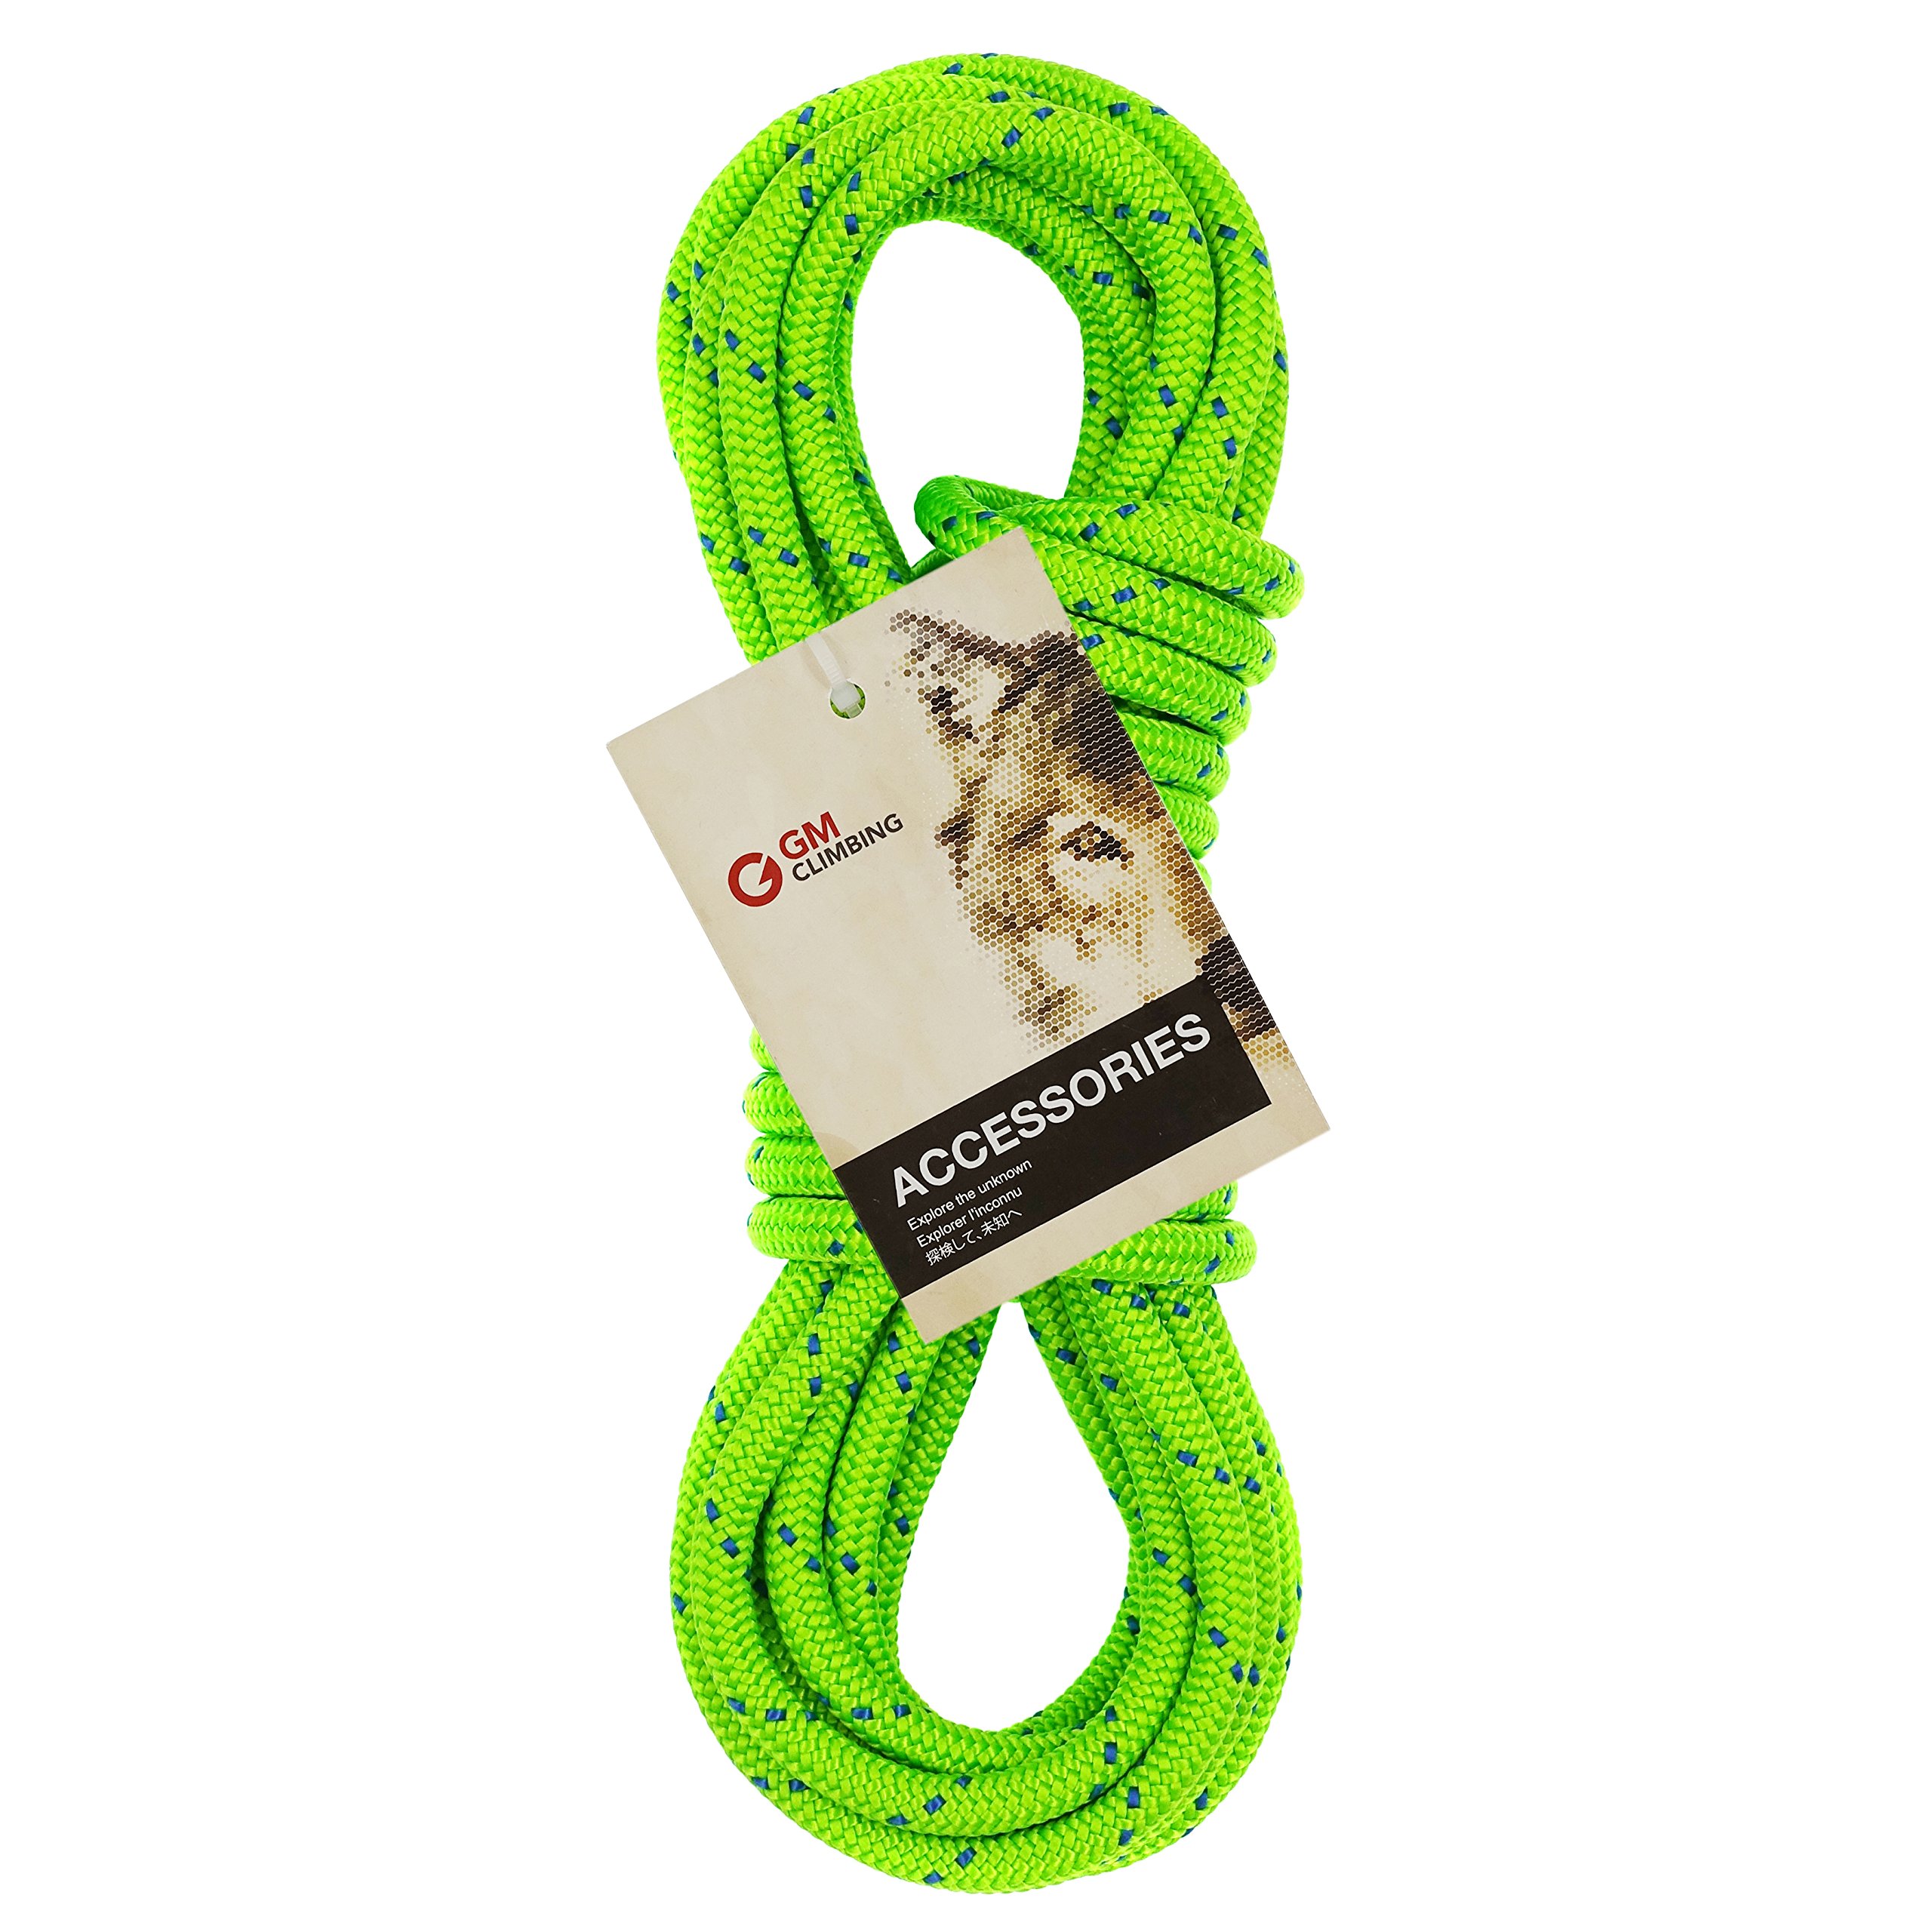 GM CLIMBING 6mm Accessory Cord Rope Double Braid CE/UIAA 6mm x